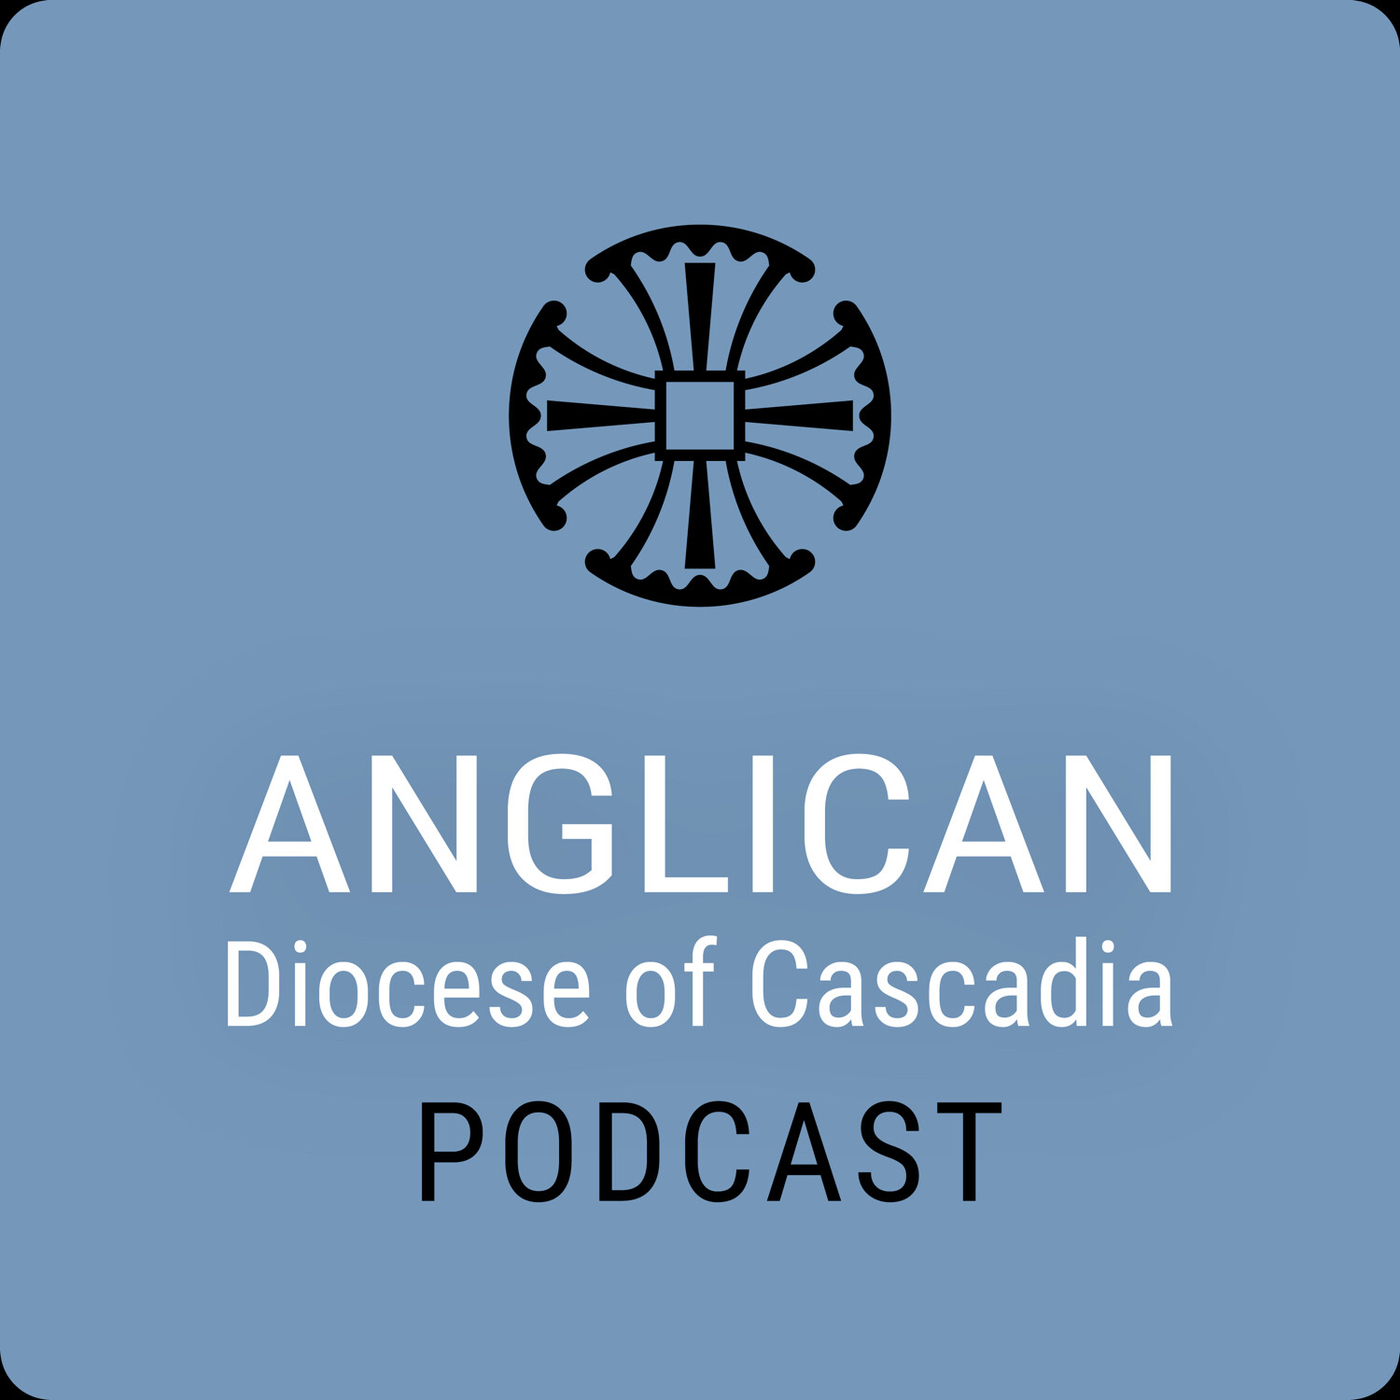 Anglican Diocese of Cascadia Podcast - Podcast.co